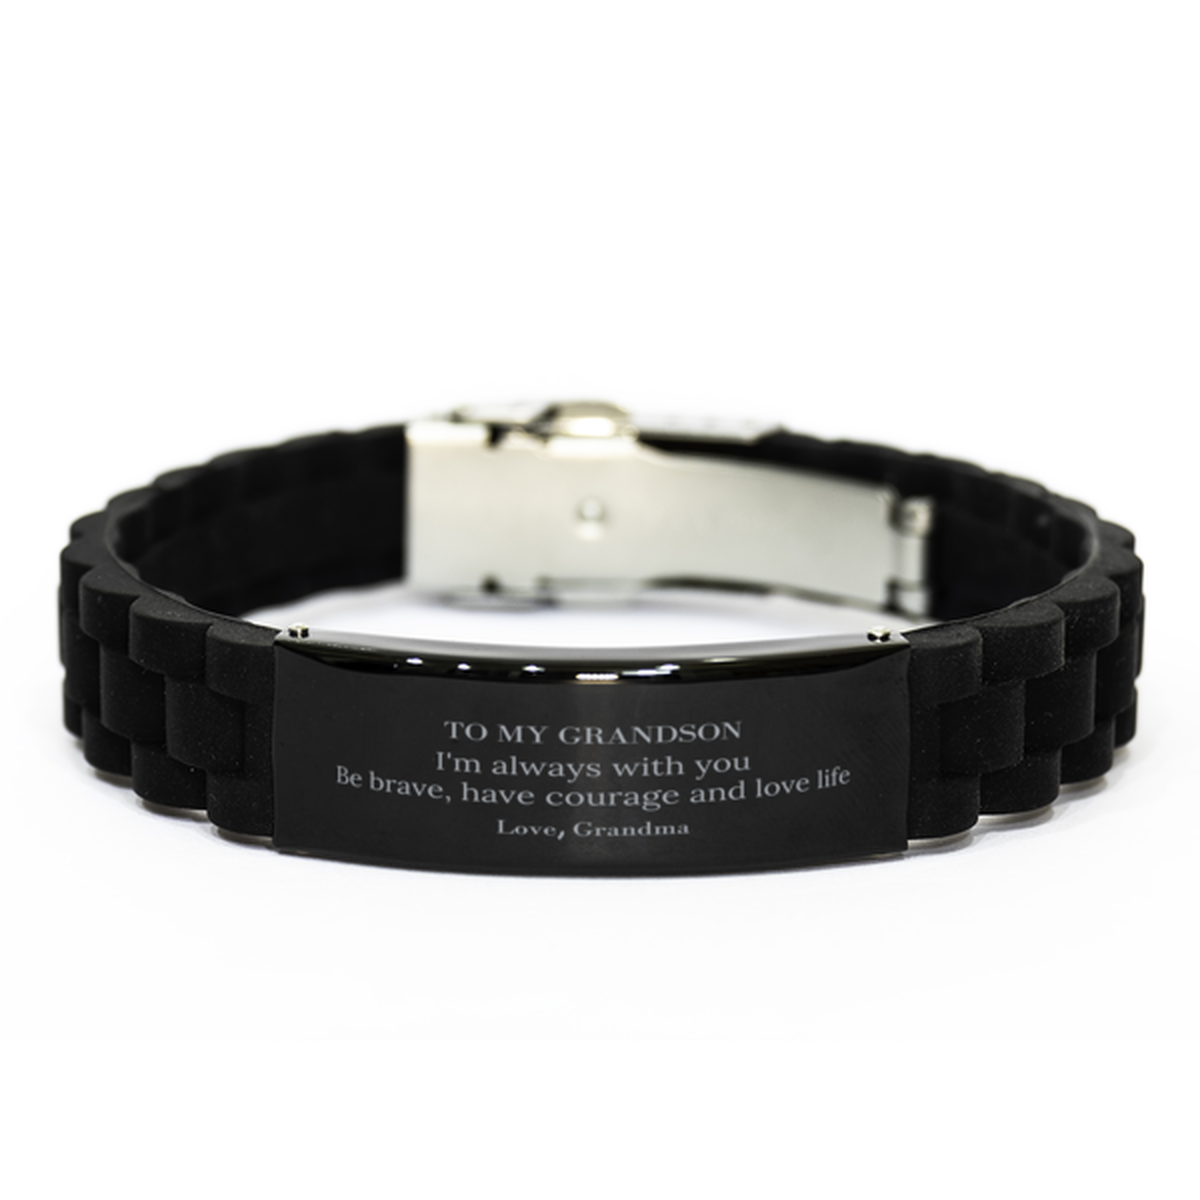 To My Grandson Gifts from Grandma, Unique Black Glidelock Clasp Bracelet Inspirational Christmas Birthday Graduation Gifts for Grandson I'm always with you. Be brave, have courage and love life. Love, Grandma